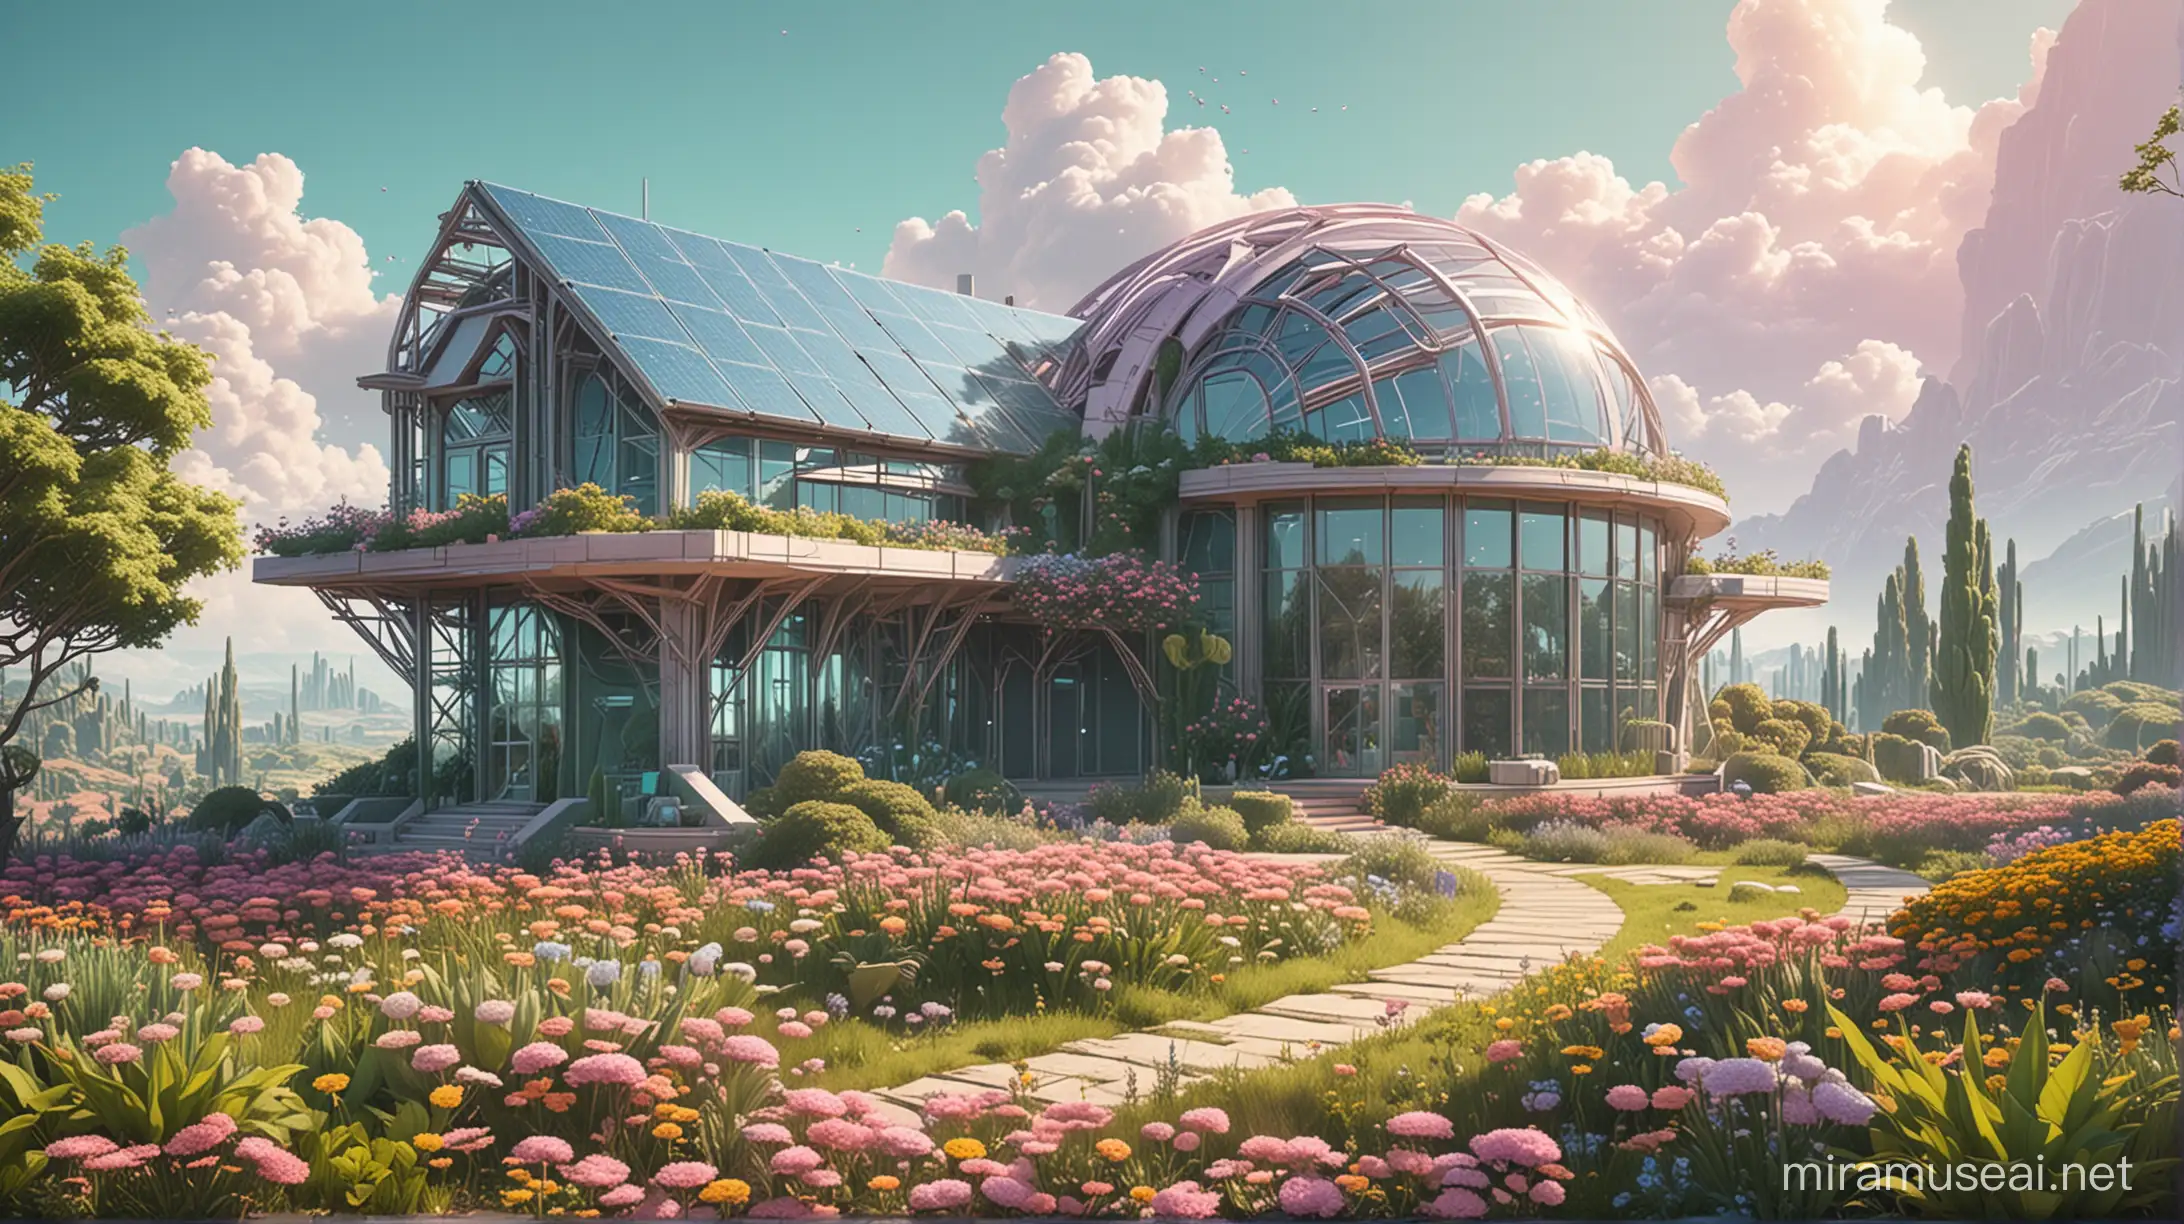 Futuristic Solar Punk Building Surrounded by Lush Gardens and Flowers